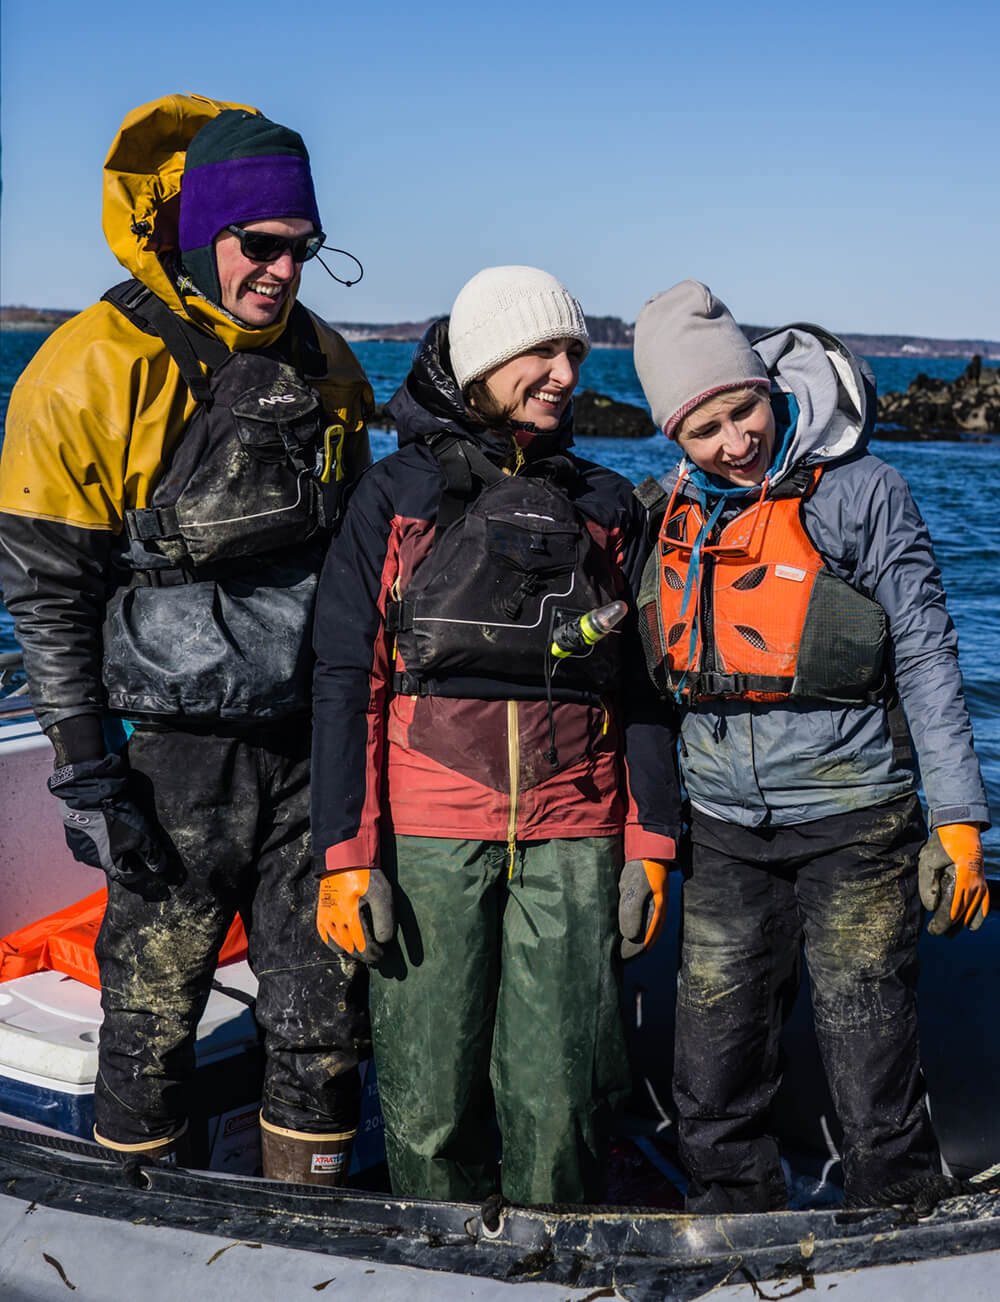 photo of james crimp, briana warner, and melissa dipalma in cold weather attire and wading boots standing in a boat